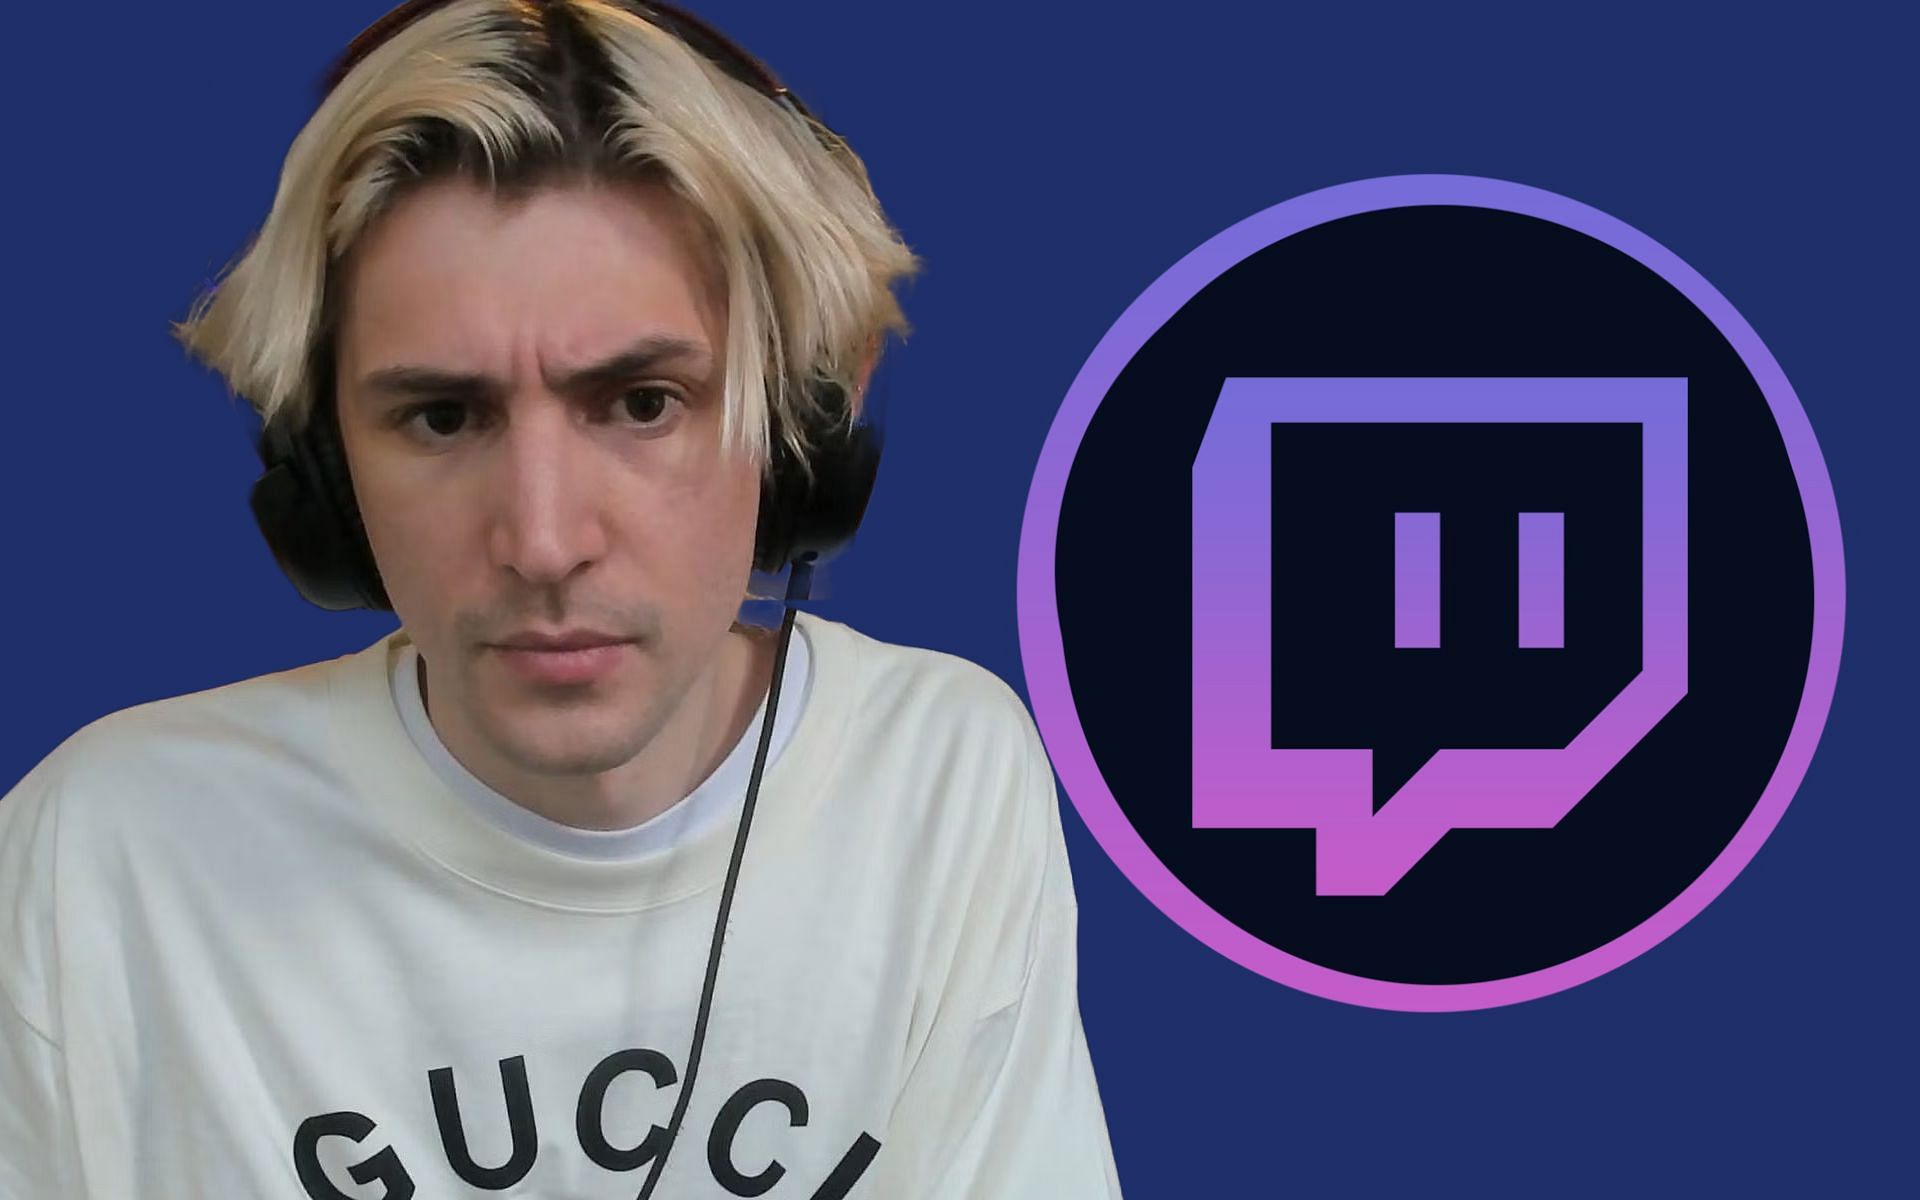 xQc responds to concerns shared by his community (Image via xQc/Twitch and Sportskeeda)